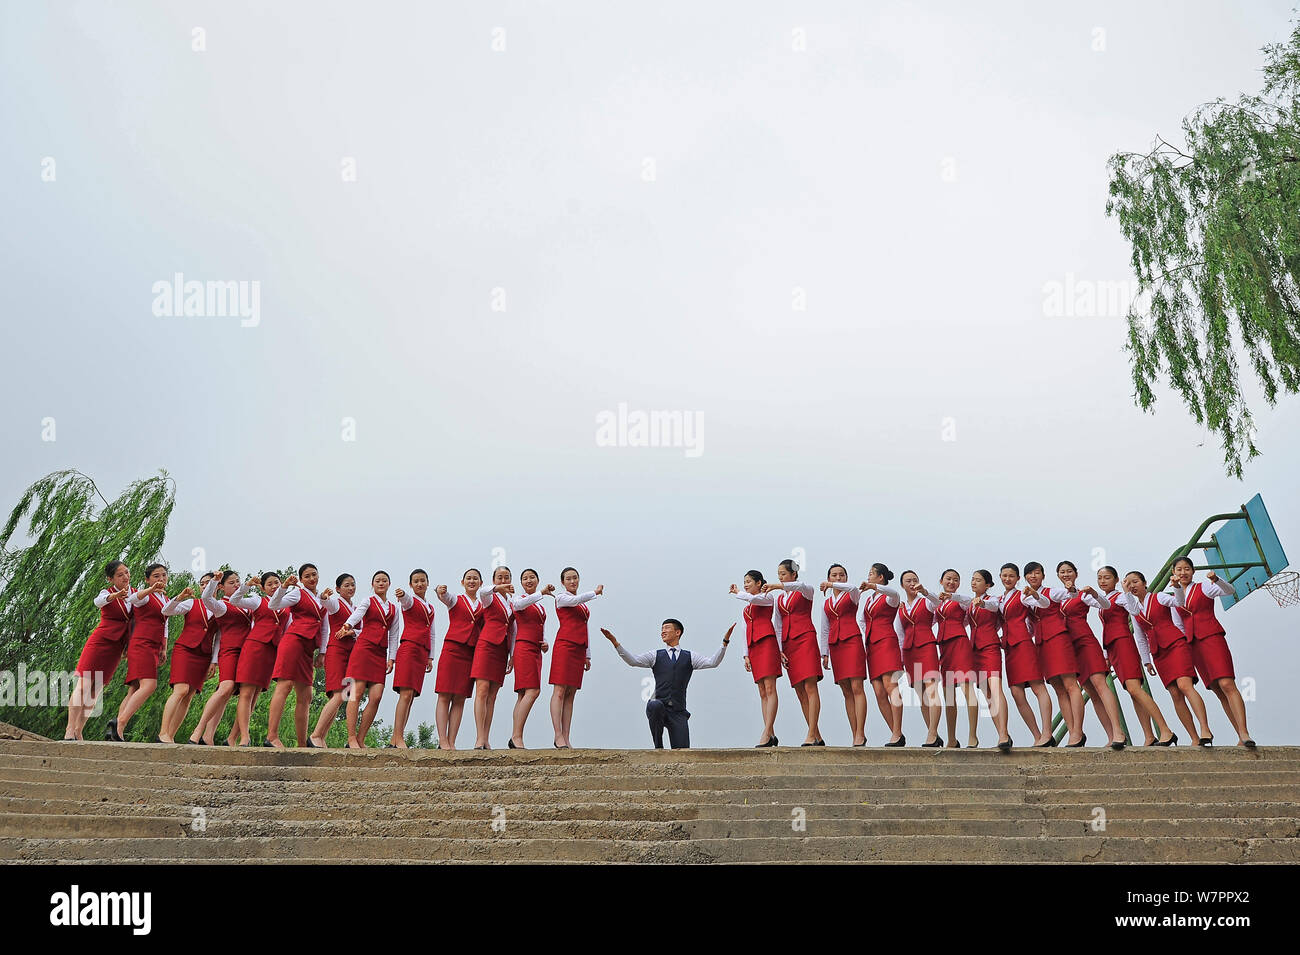 Female graduates of flight attendants major dressed in air hostess uniforms, pose for gradation photos in Taiyuan city, north China's Shanxi province, Stock Photo